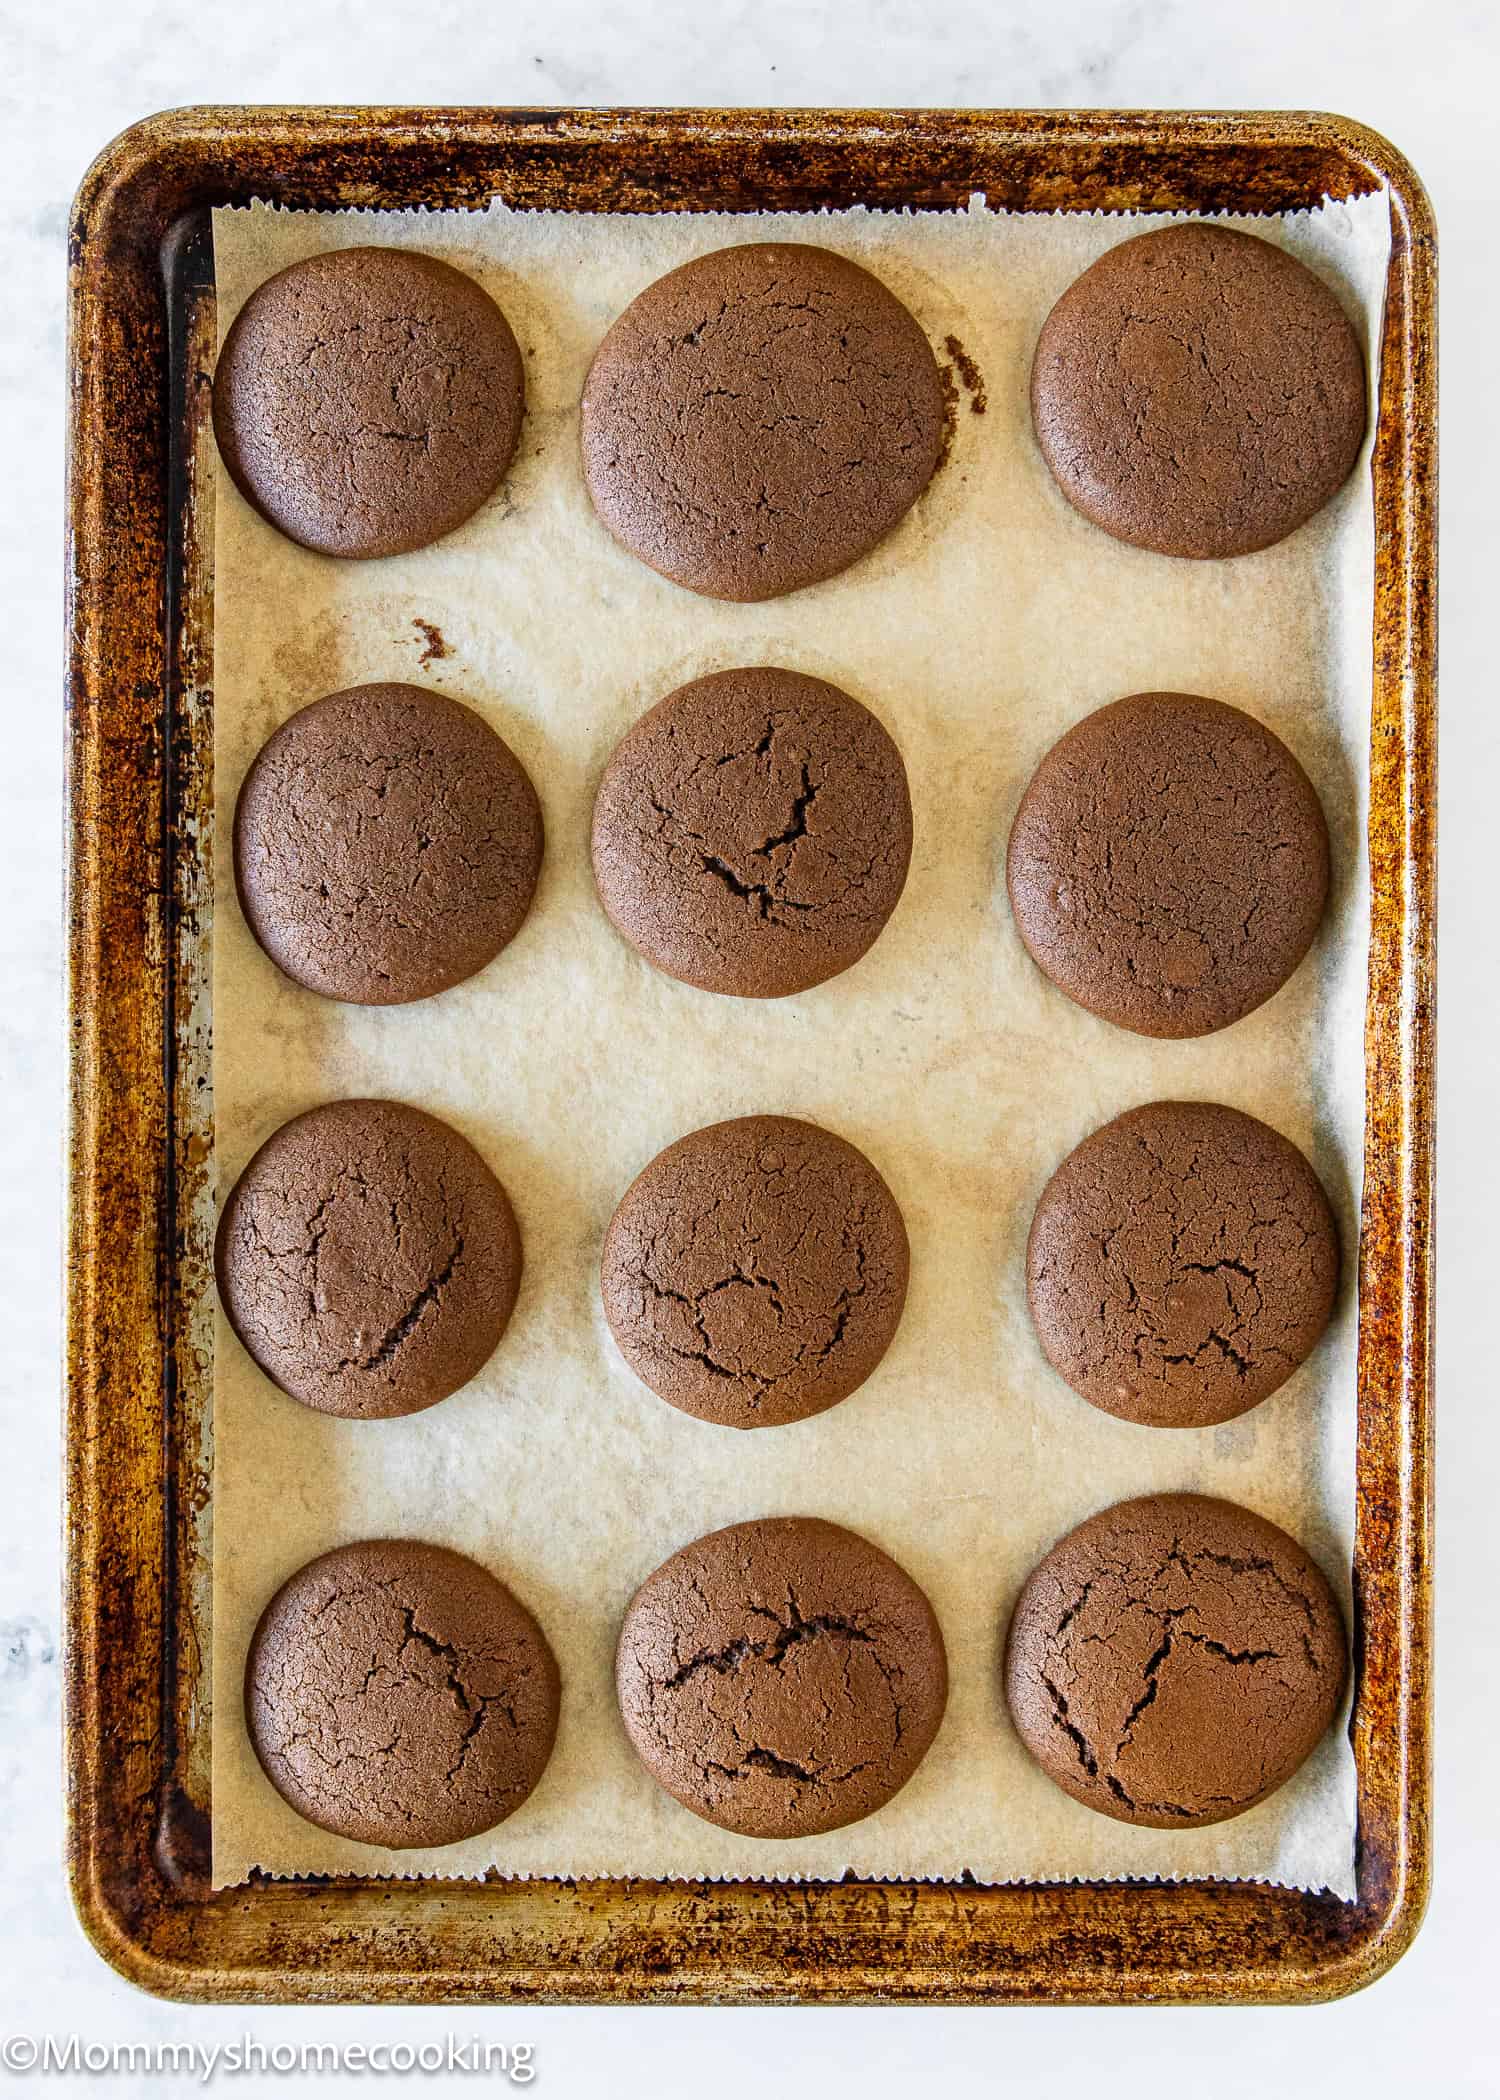 baked Chocolate Whoopie Pies in a baking tray.